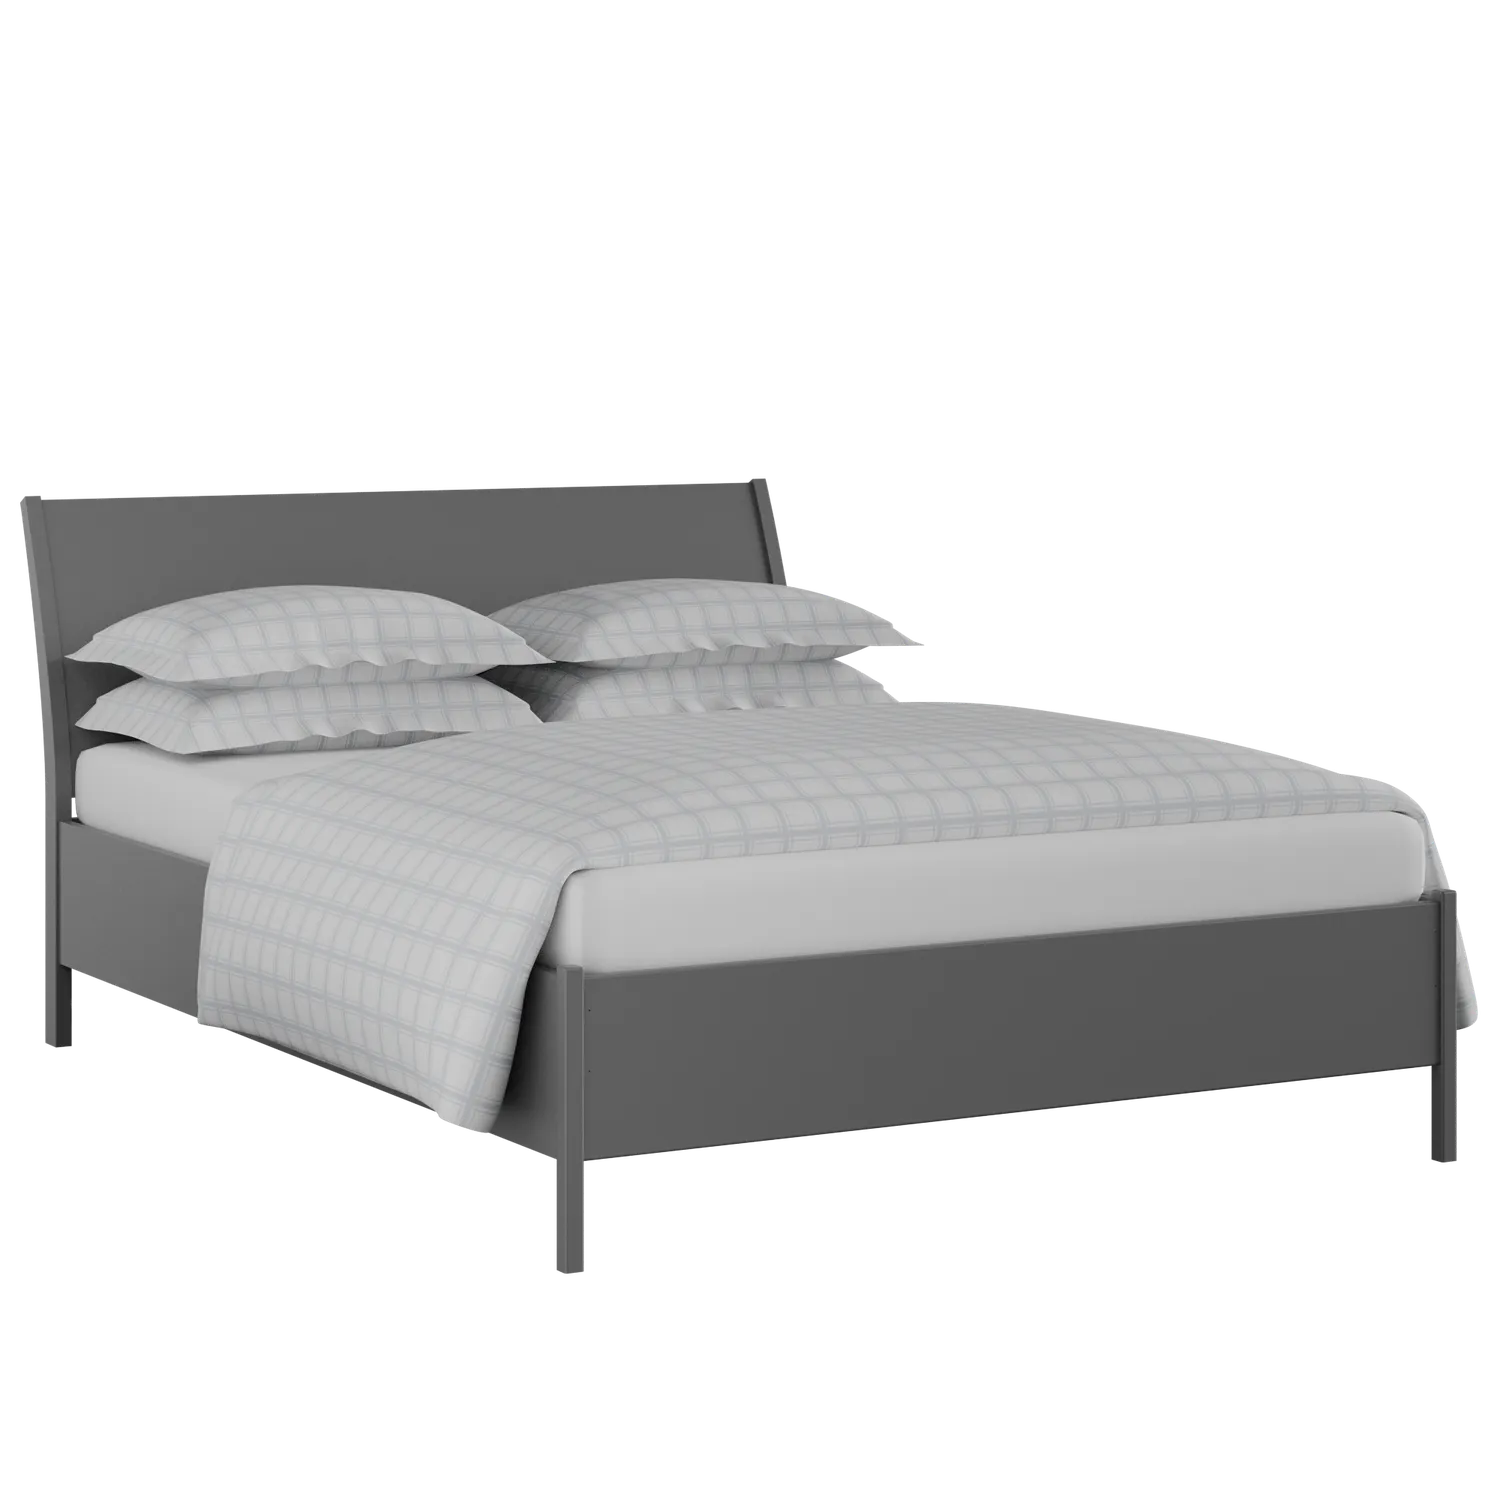 Hunt Painted painted wood bed in grey with Juno mattress